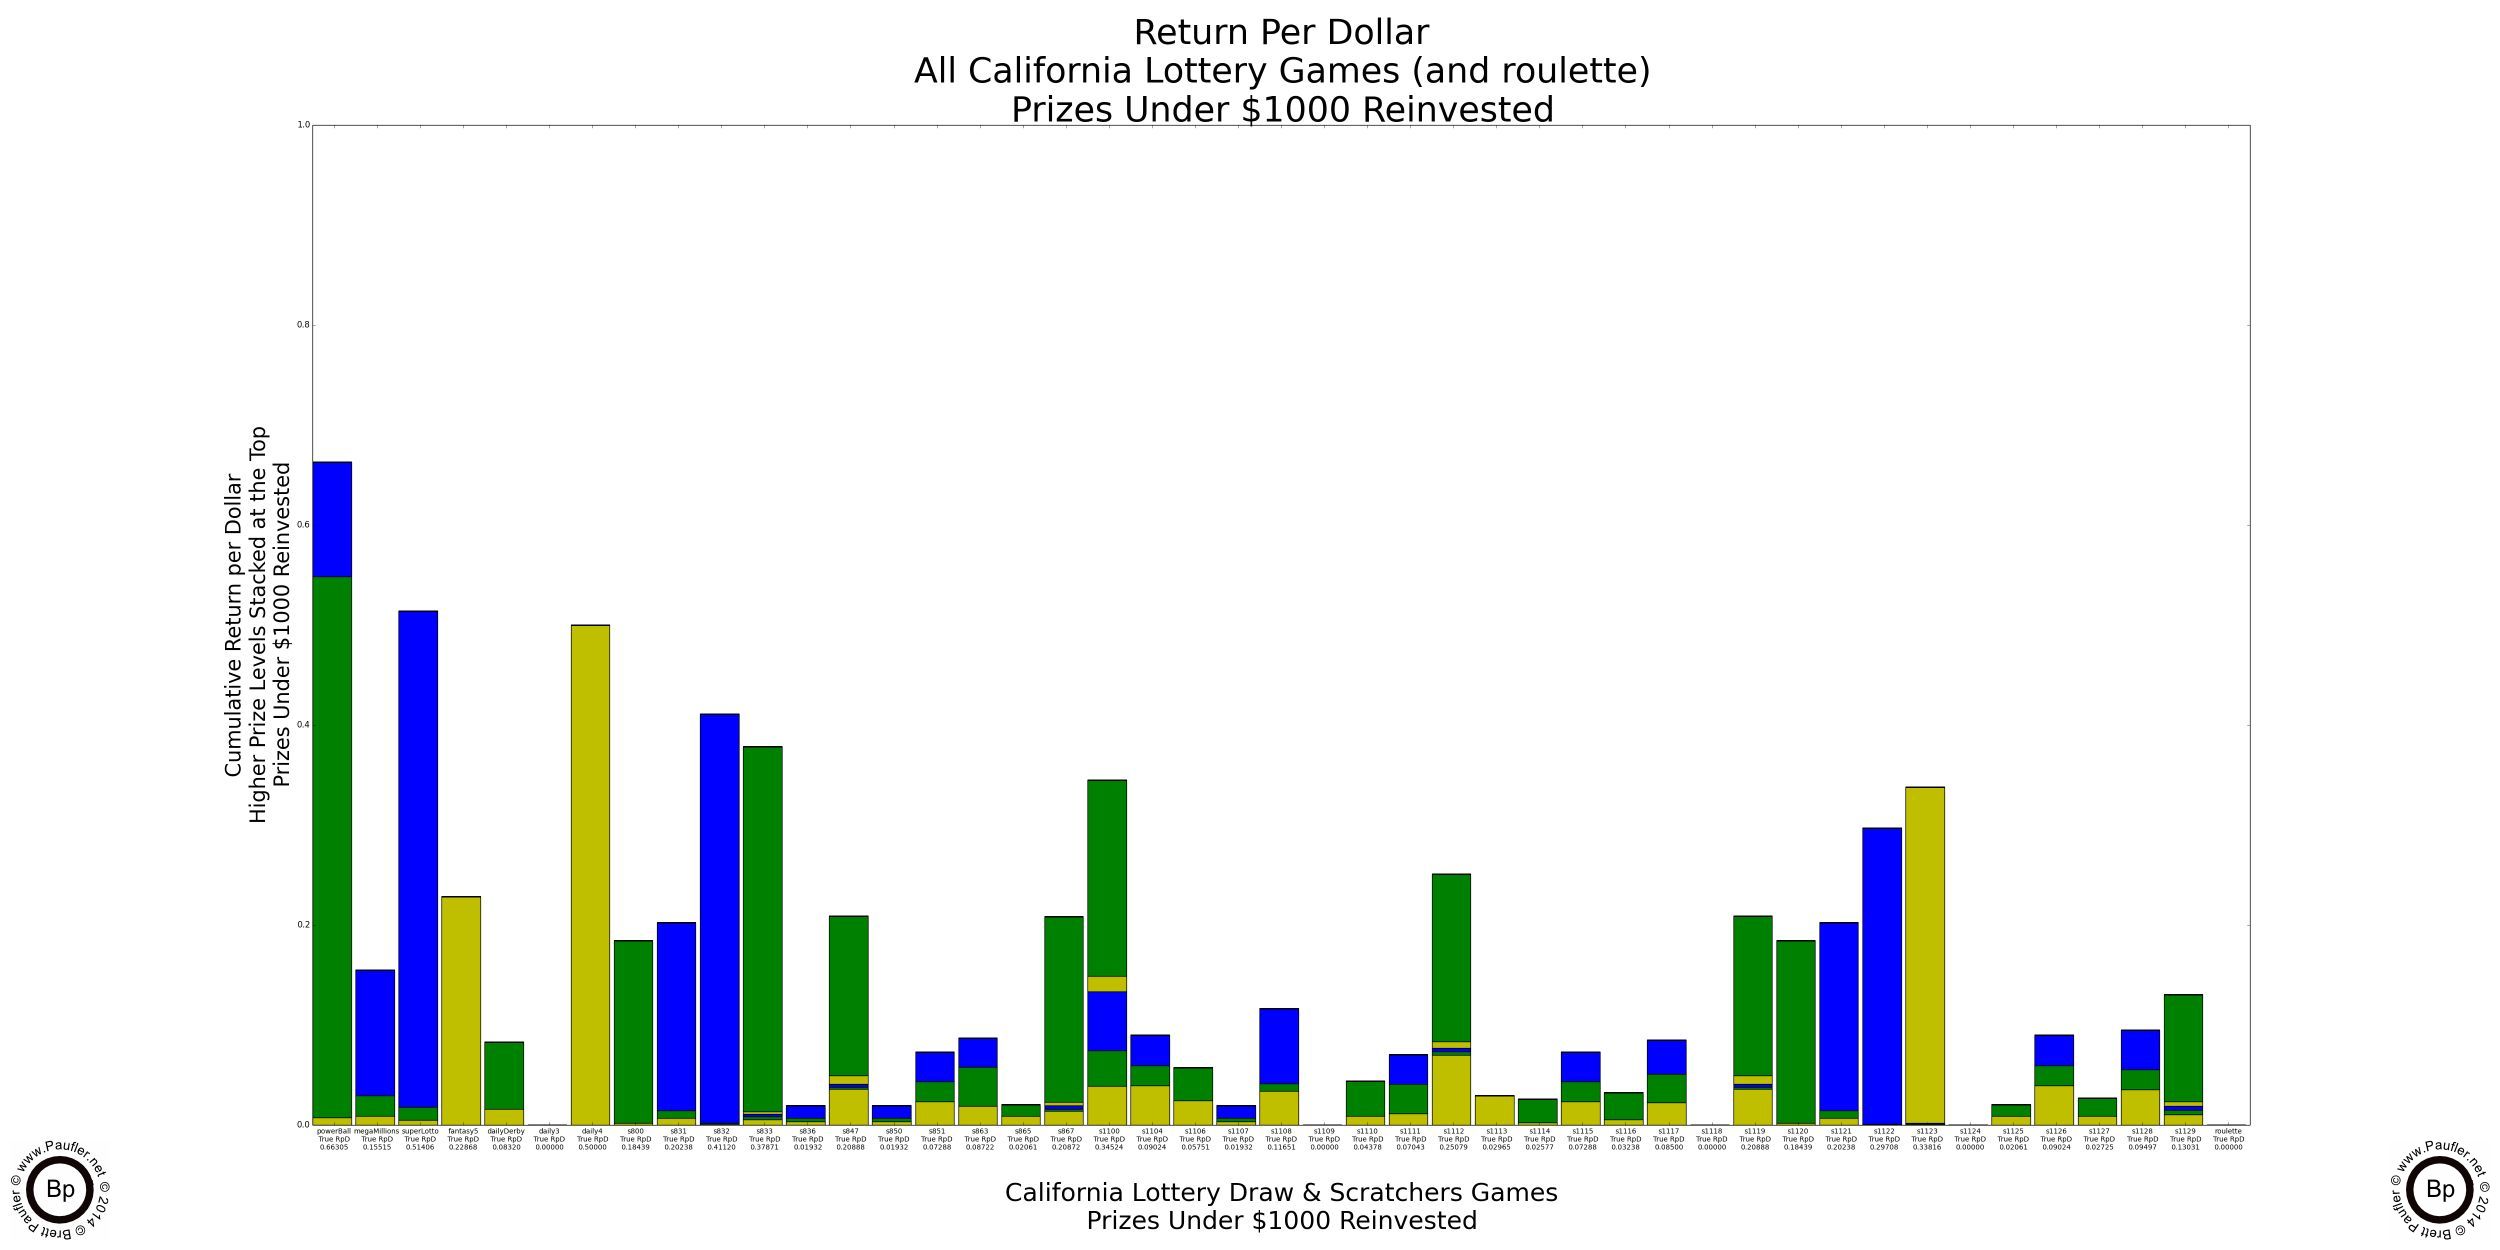 Graph of California Lottery Return per Dollar with Prizes below $1,000 Reinvested